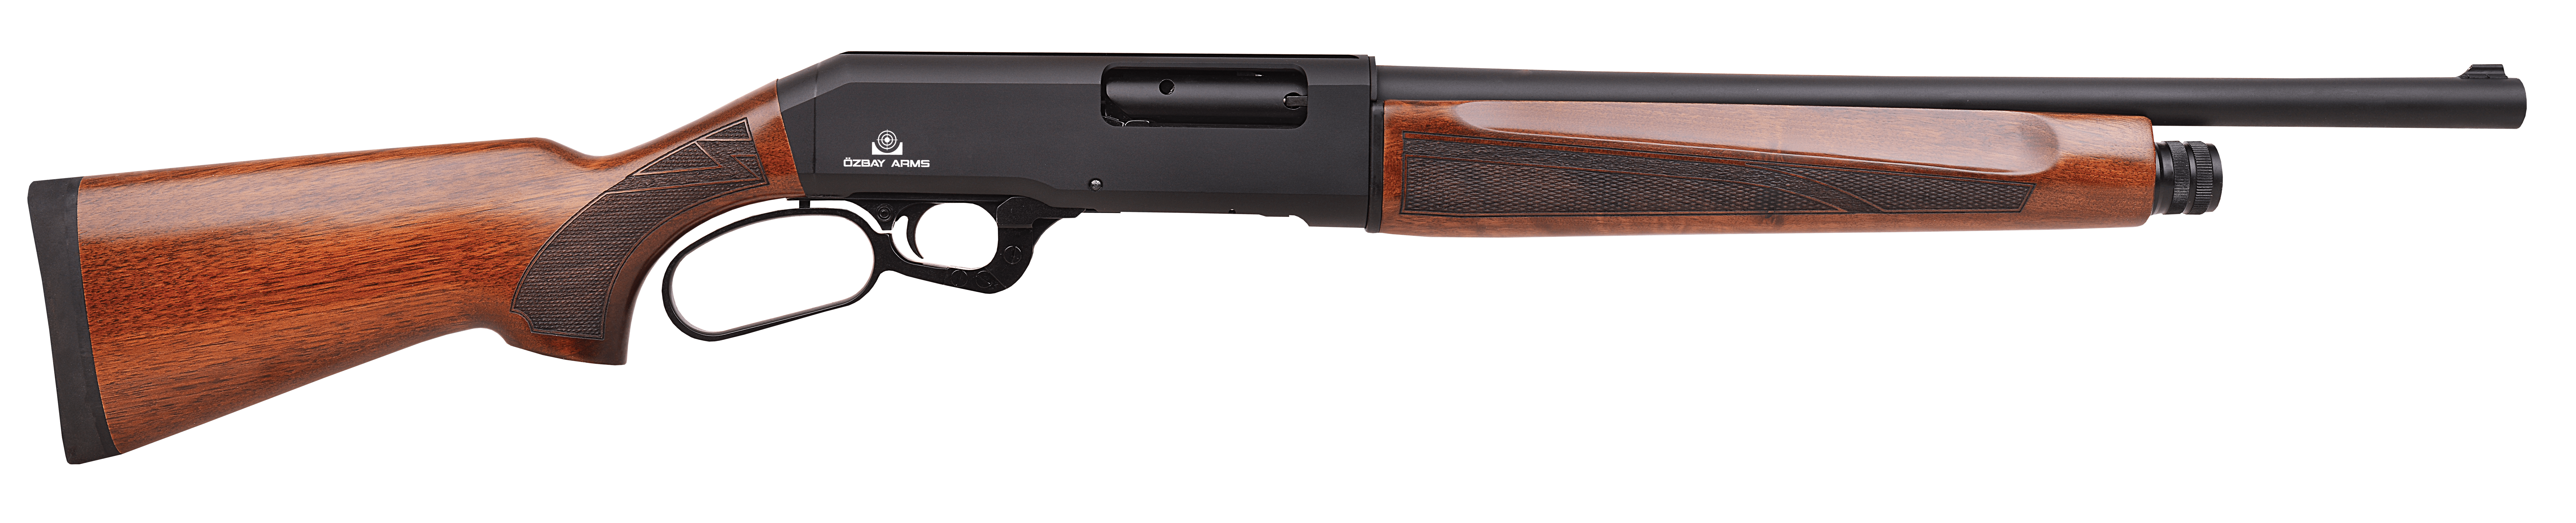 Ozbay LAP12 Lever Action